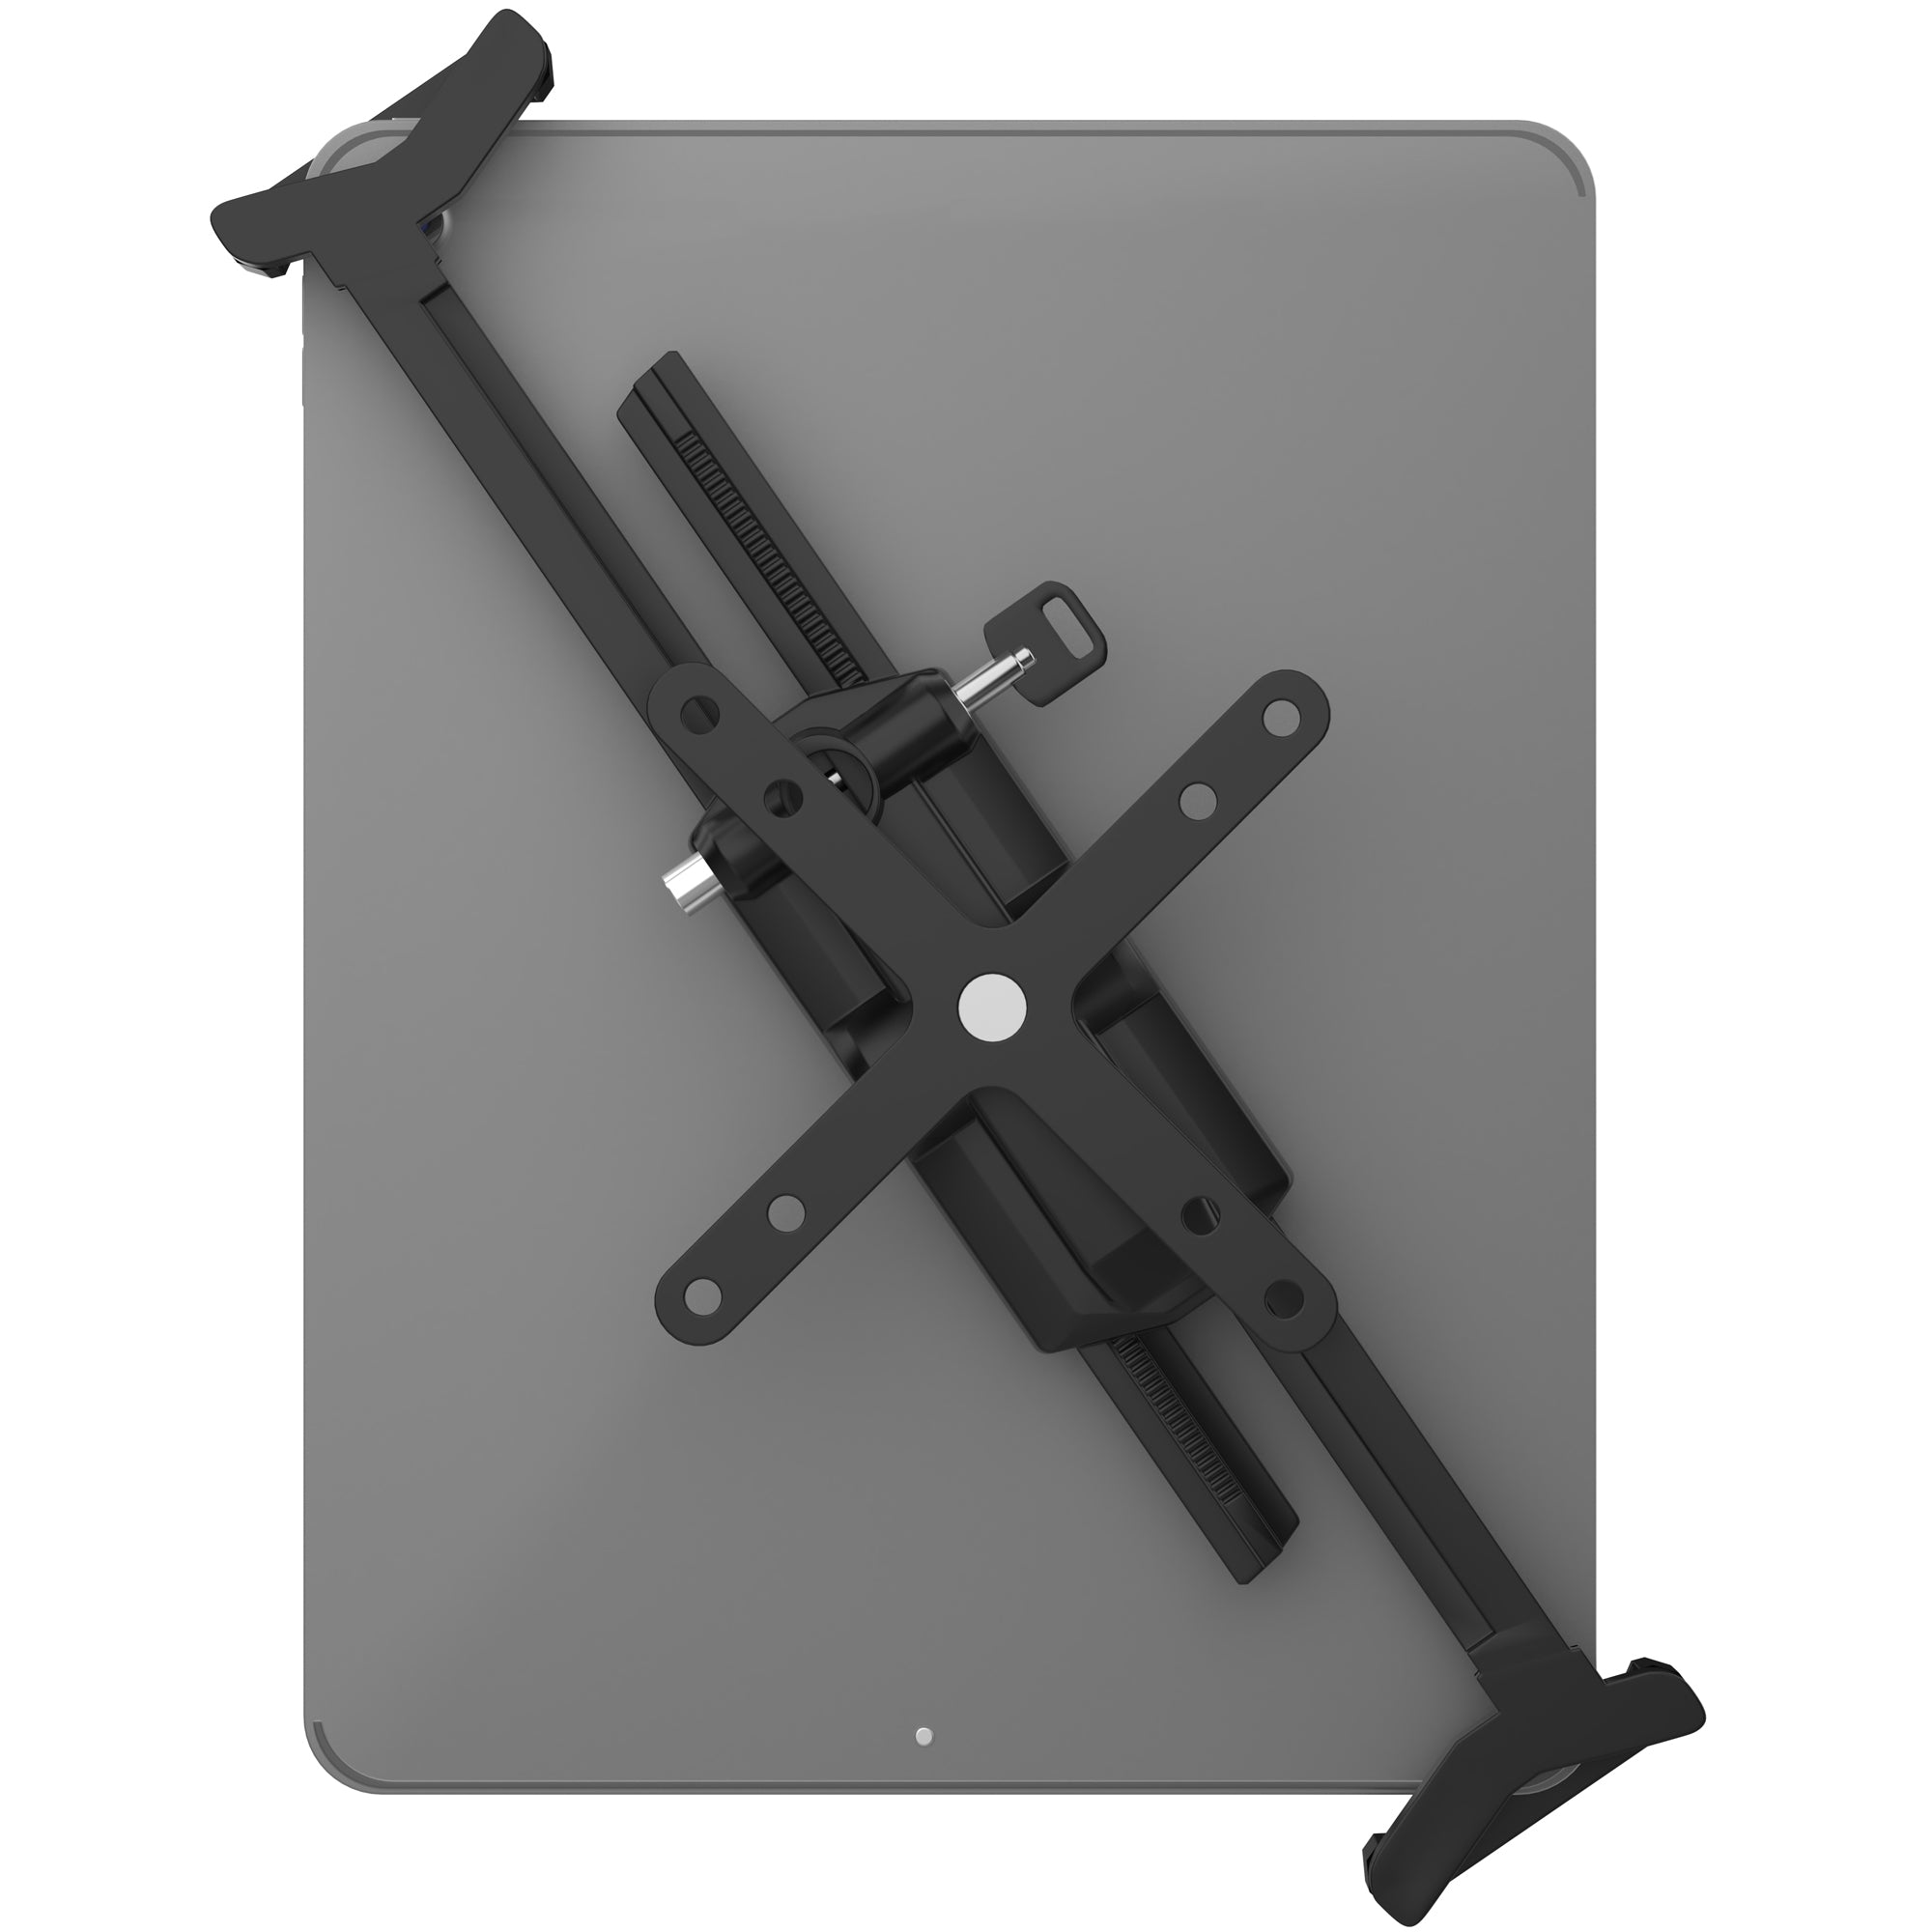 Security VESA and Wall Mount for 7-14 Inch Tablets, including the iPad 10.2-Inch (7th/ 8th/ 9th Gen.)